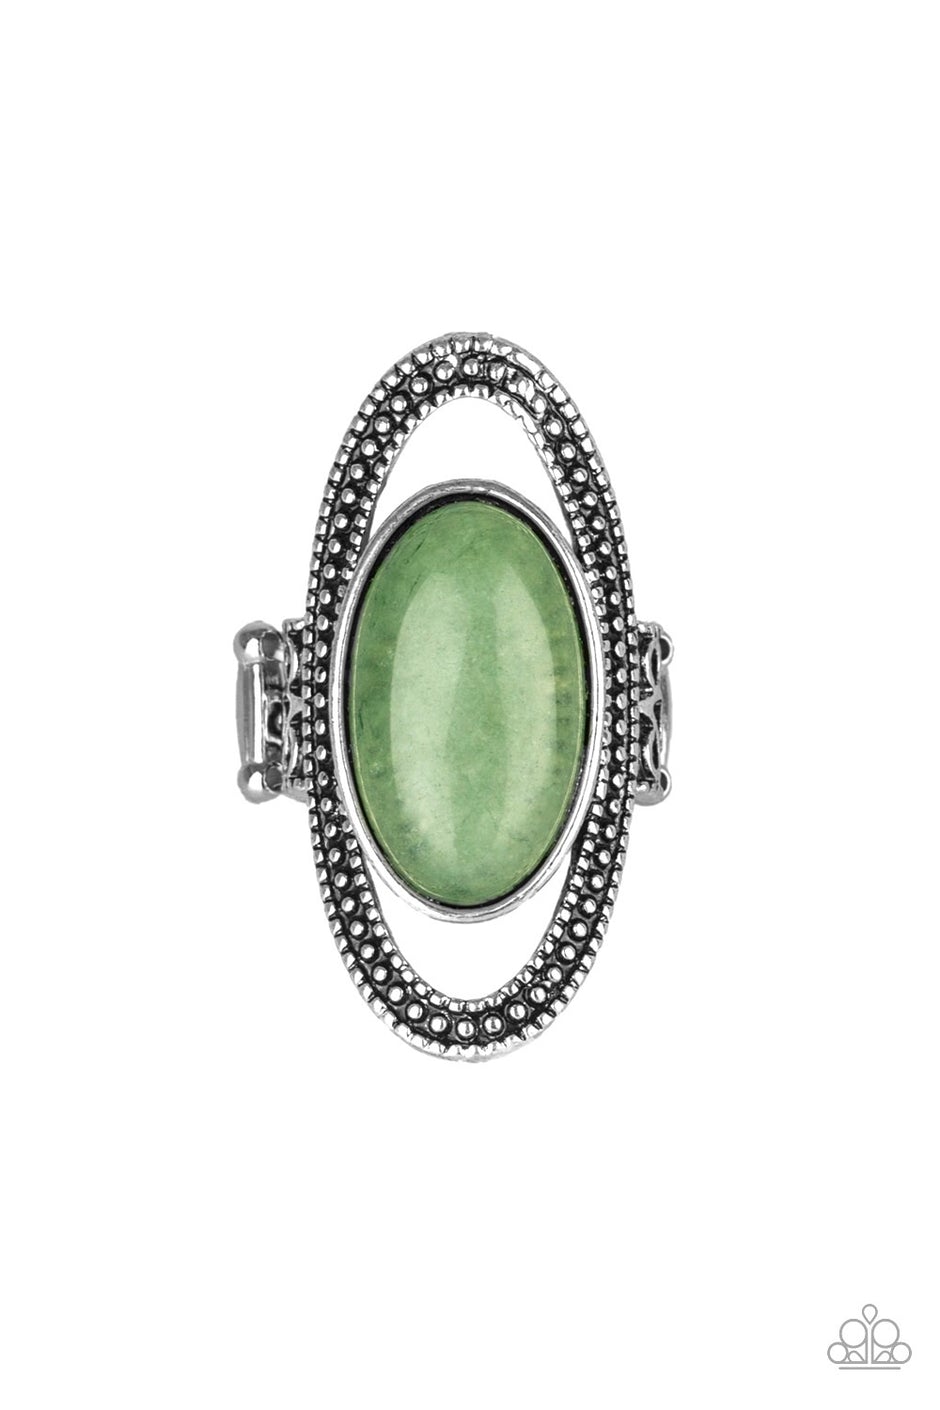 Western Royalty - Green Stone Rings a studded silver frame encircles an earthy stone center, creating a dramatic Southwestern inspired look atop the finger. As the stone elements in this piece are natural, some color variation is normal. Features a stretchy band for a flexible fit.

Sold as one individual ring.

